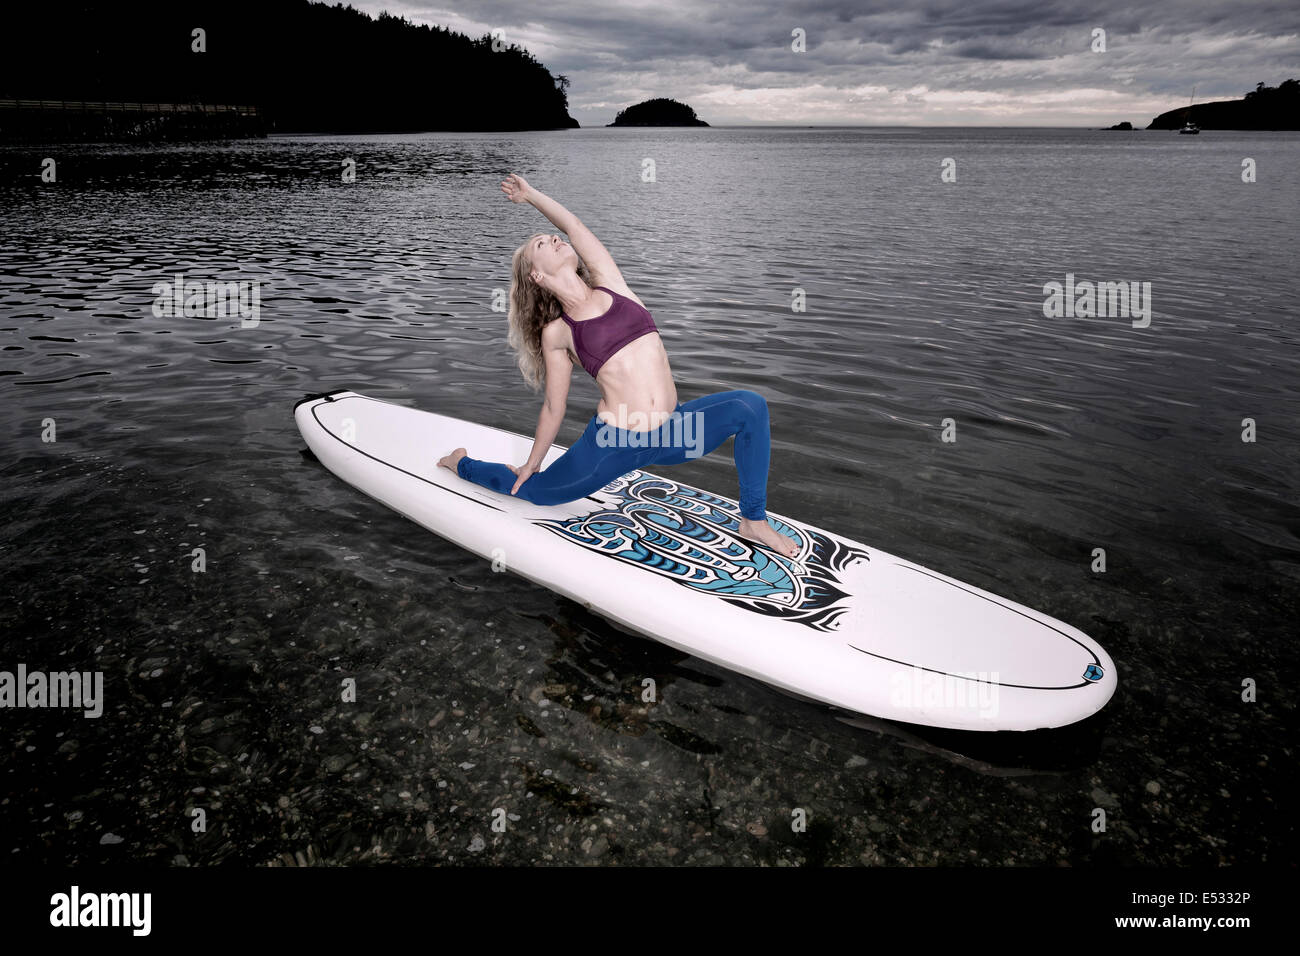 WASHINGTON - Yoga instructor Carly Hayden warming up on a SUP, (stand up paddle board), in Bowman Bay. Stock Photo